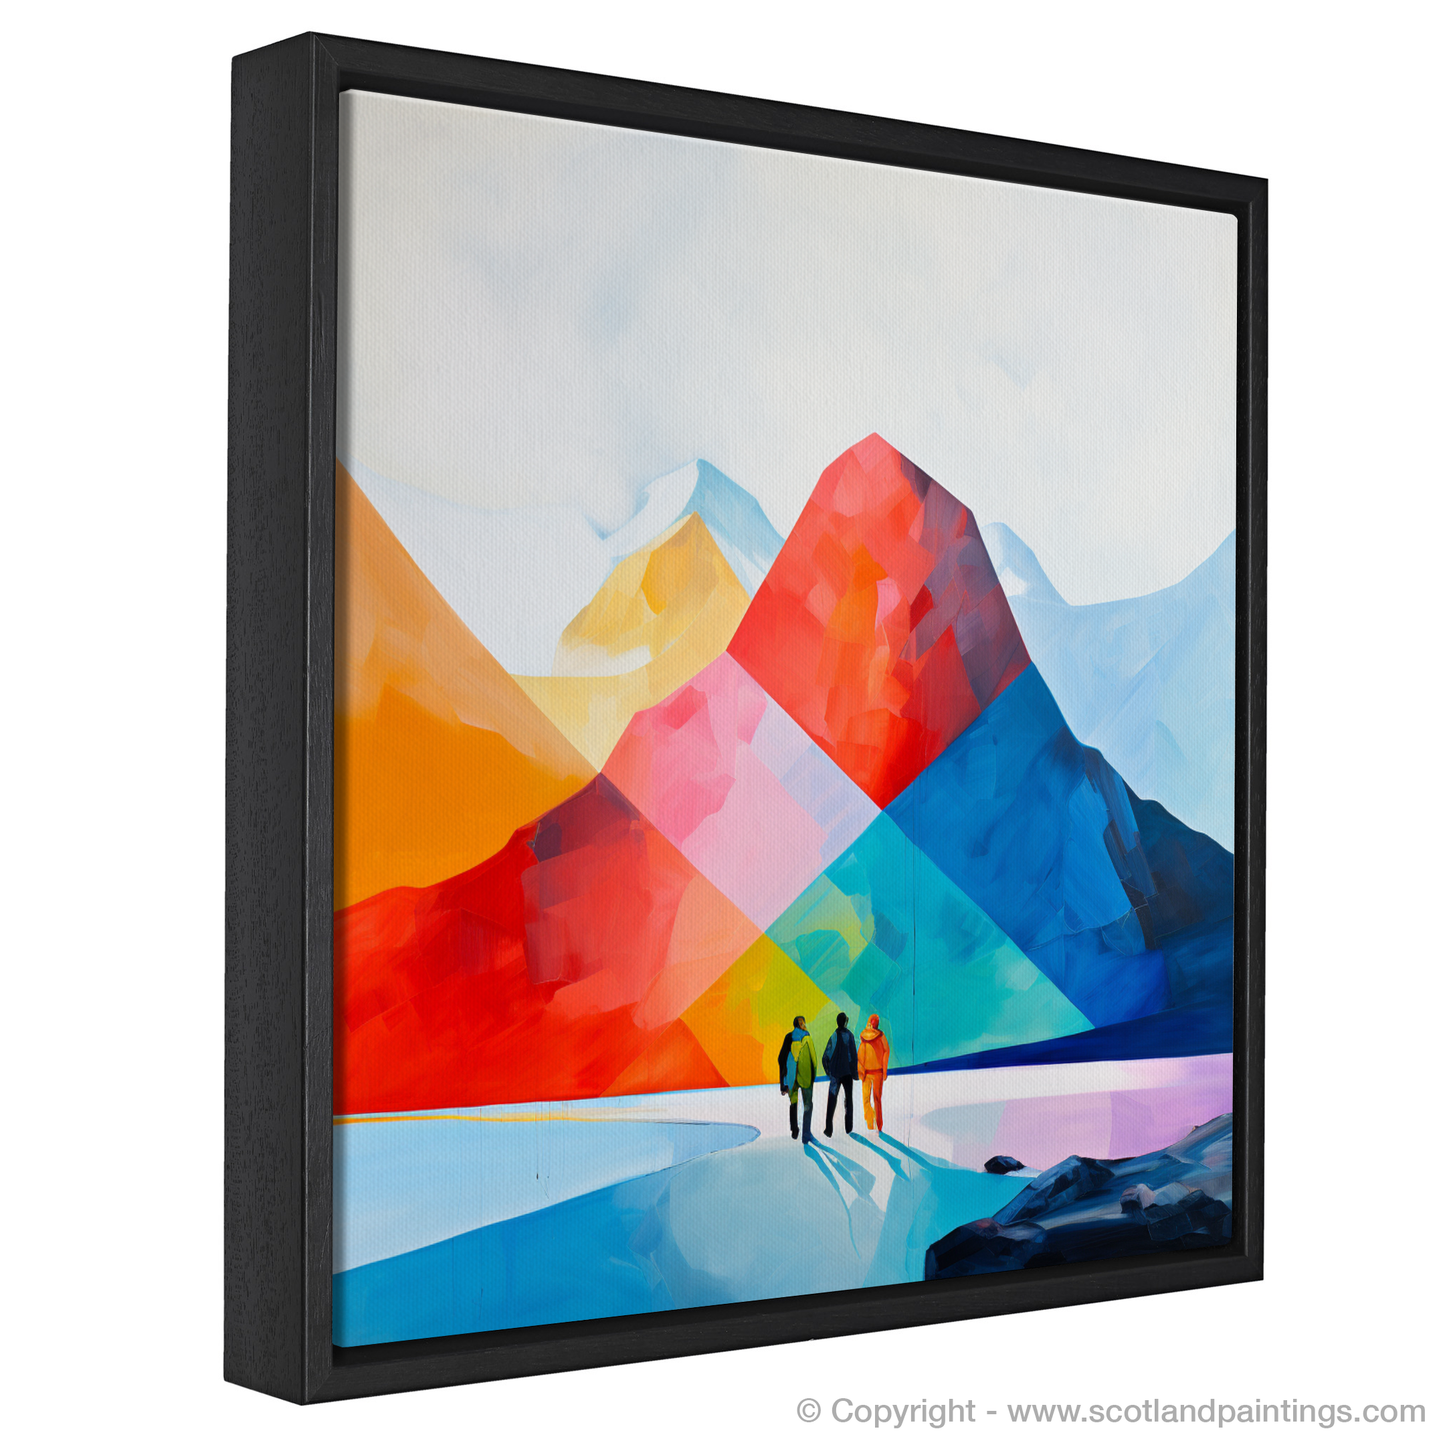 Painting and Art Print of Hikers in Glencoe entitled "Hikers in Glencoe: A Minimalist Tribute to the Scottish Highlands".